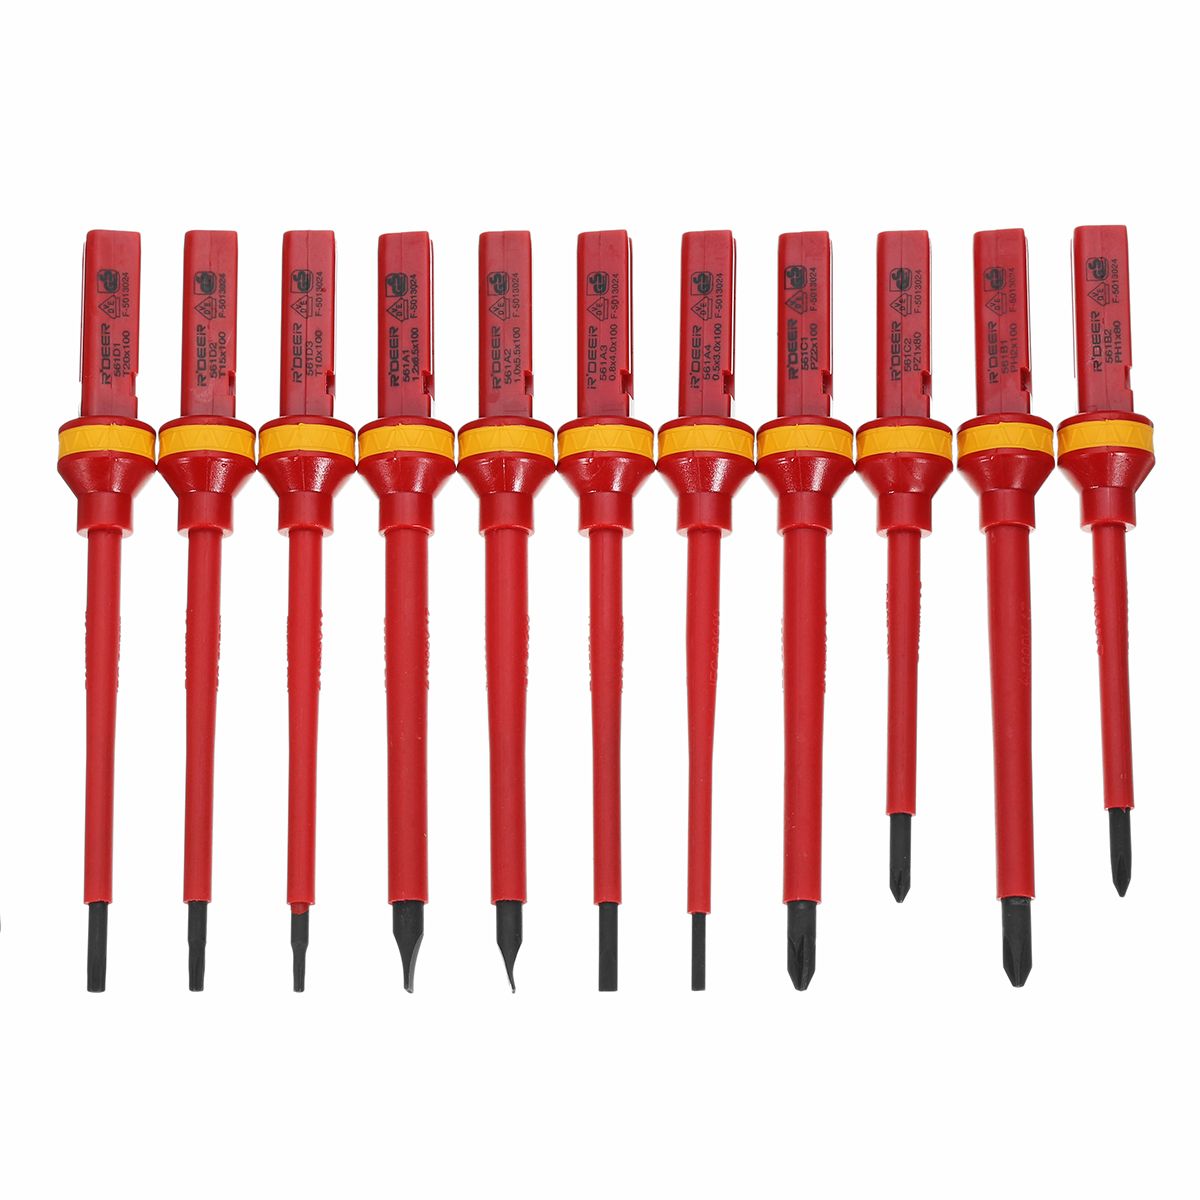 13Pcs-1000V-Electronic-Insulated-Screwdriver-Set-Phillips-Slotted-Torx-CR-V-Screwdriver-Hand-Tools-1224521